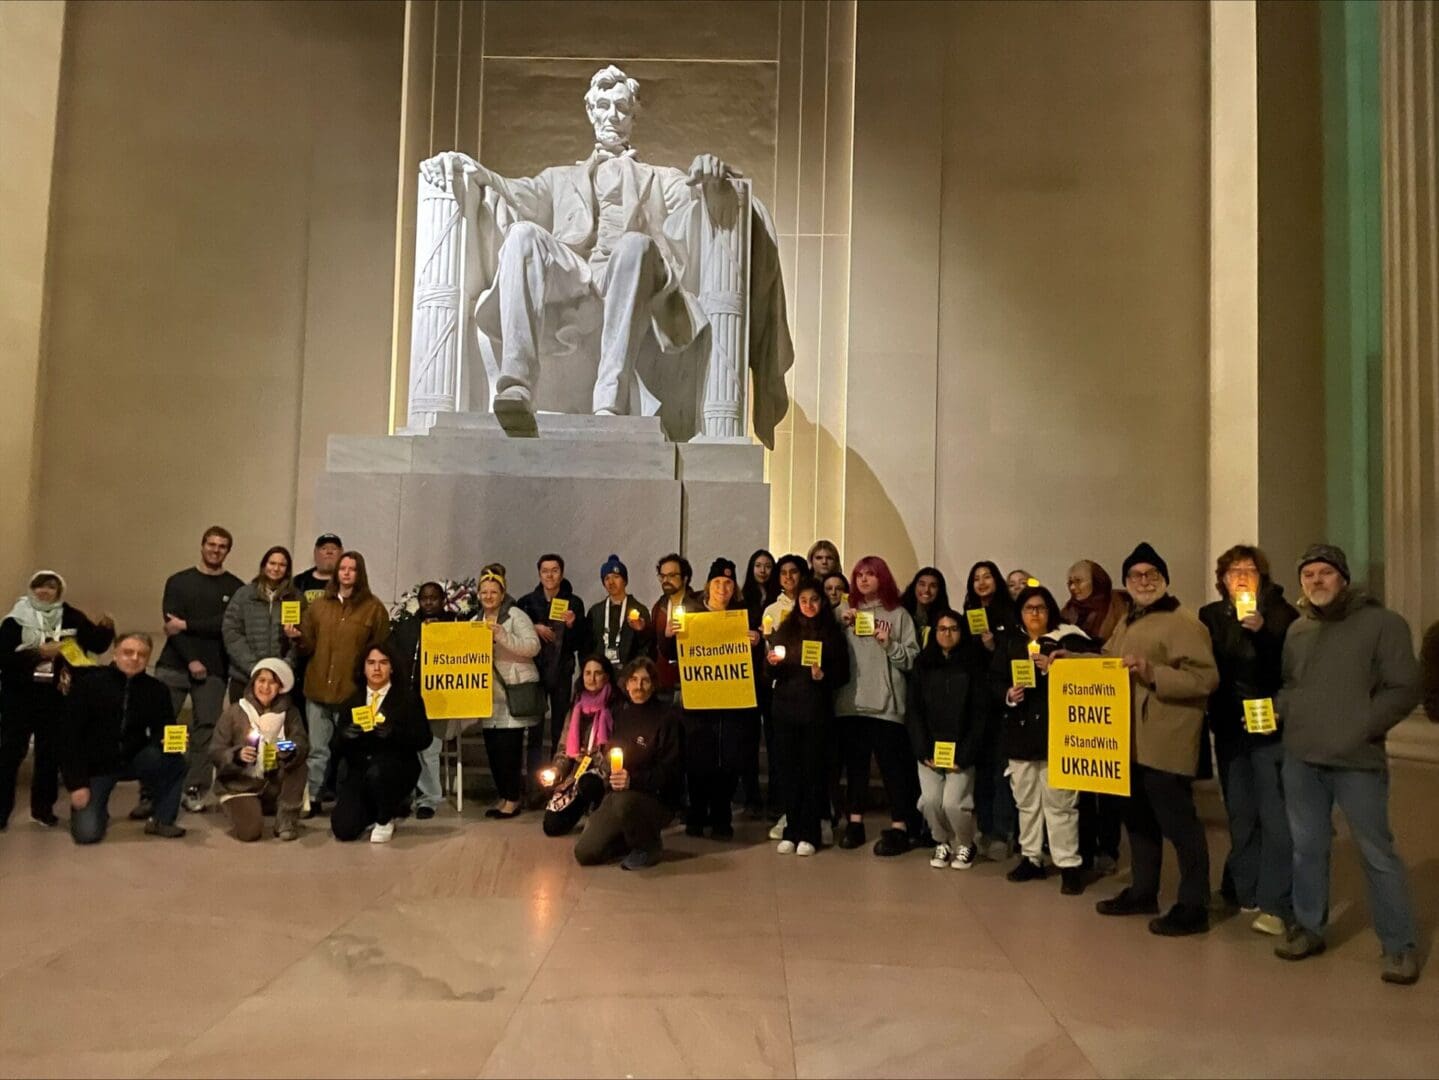 Amnesty International protesters in front of Lincoln Memorial